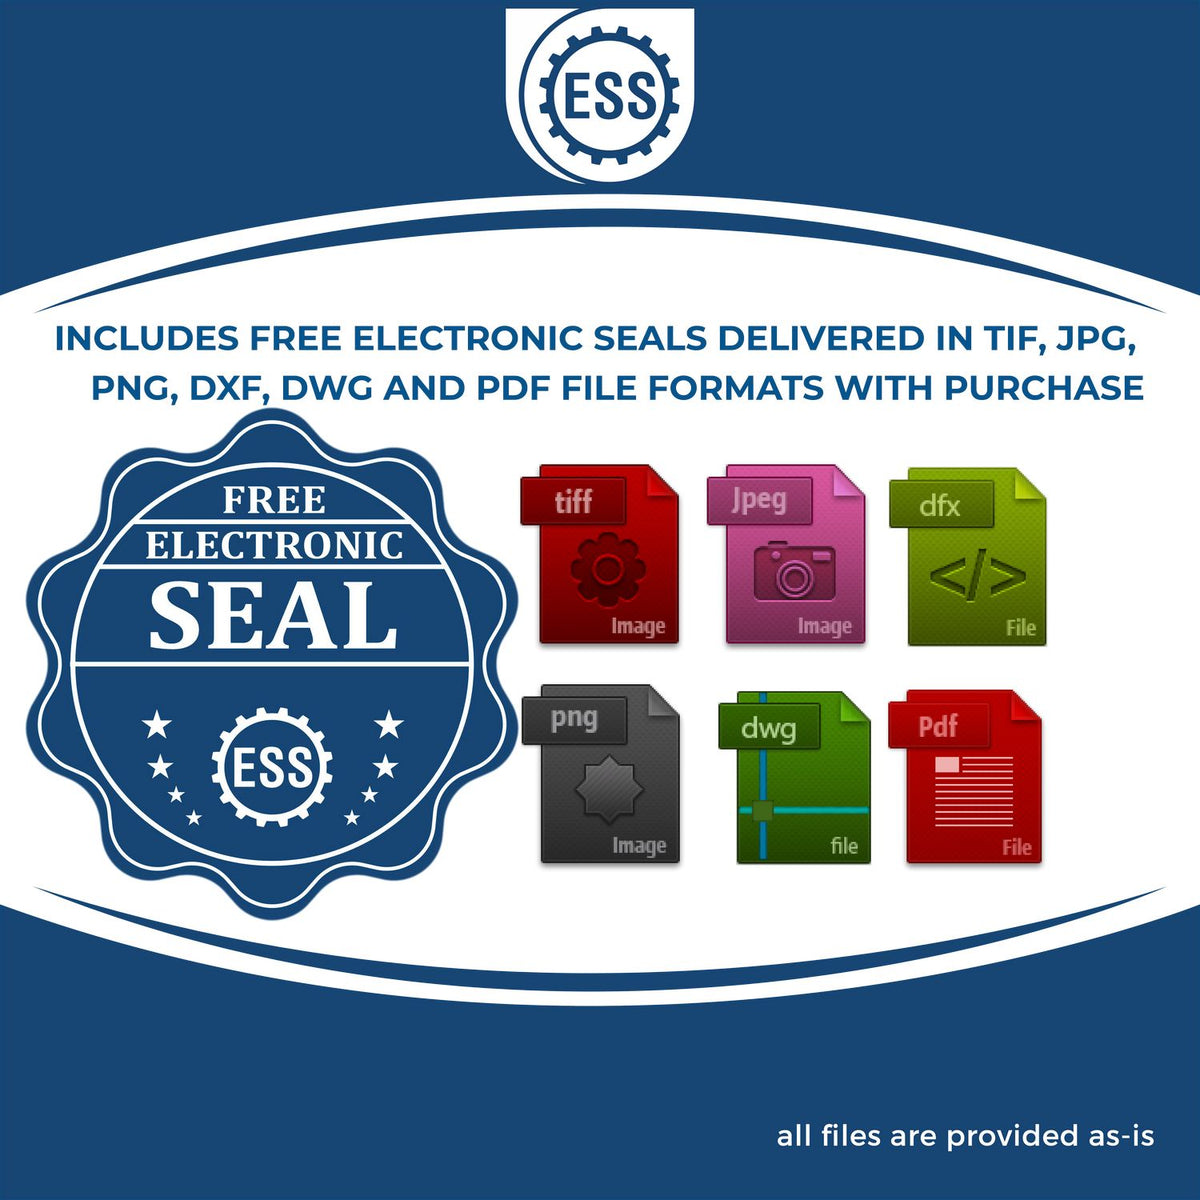 An infographic for the free electronic seal for the Gift Massachusetts Geologist Seal illustrating the different file type icons such as DXF, DWG, TIF, JPG and PNG.